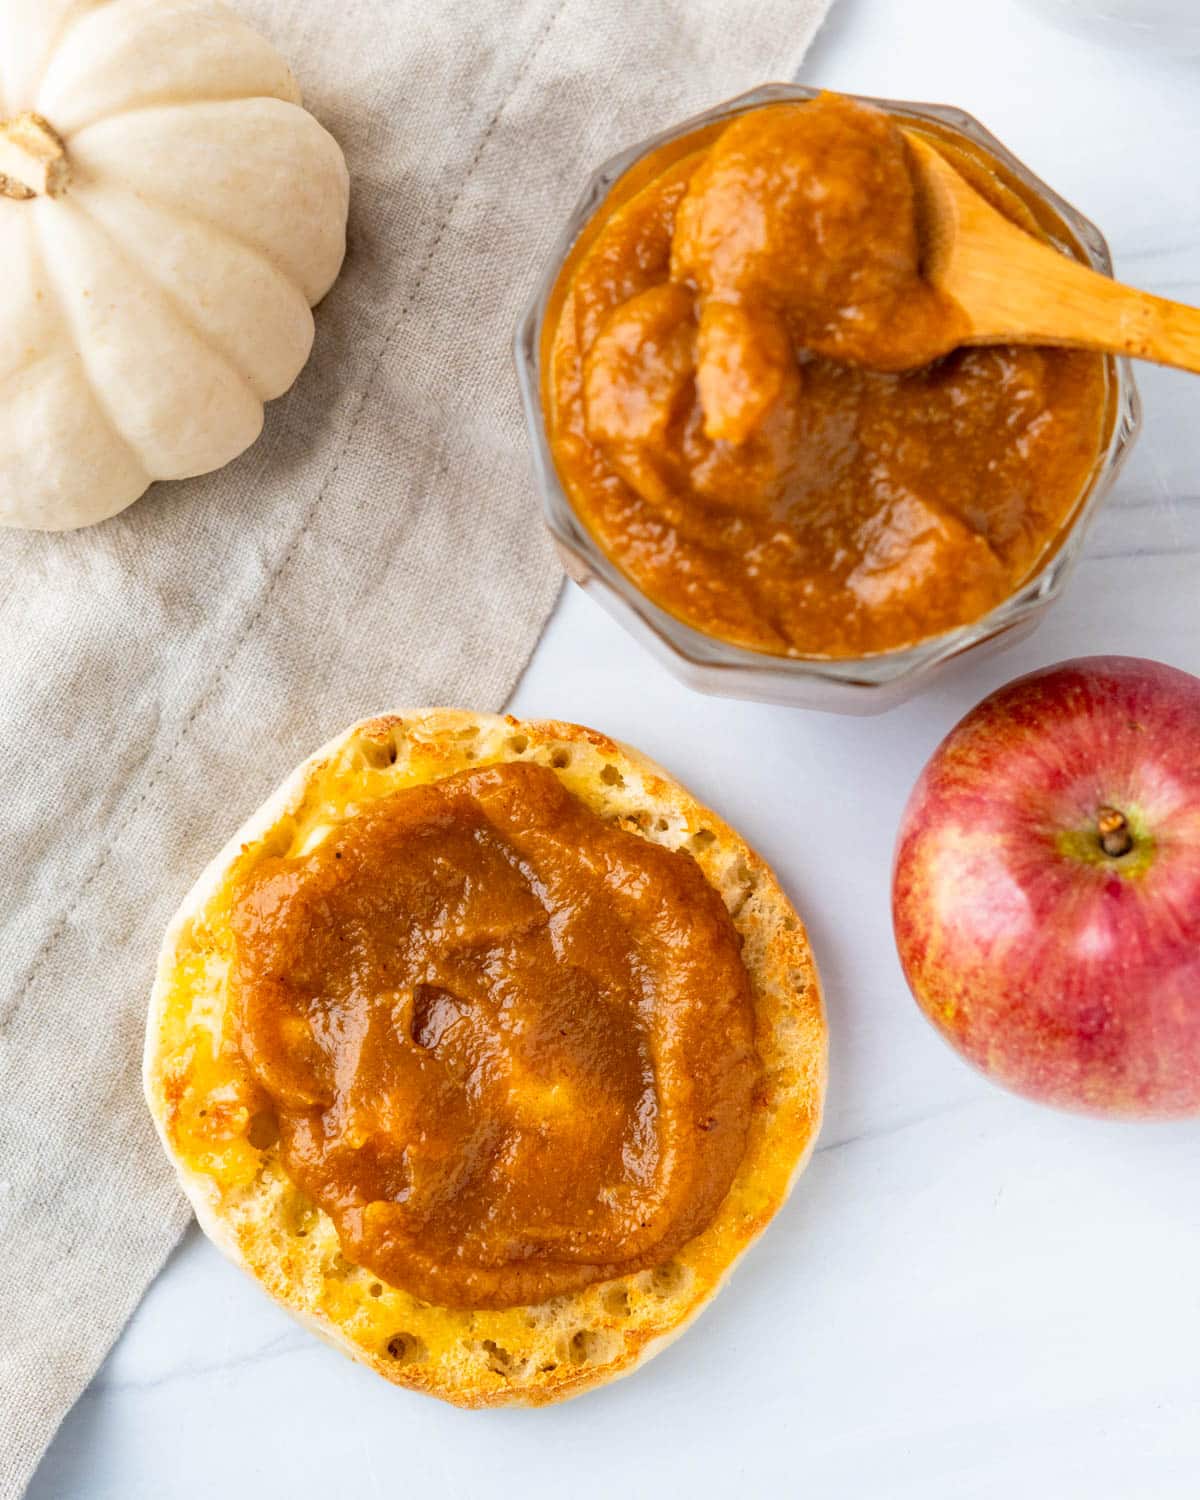 Spreading a muffin with apple pumpkin butter.